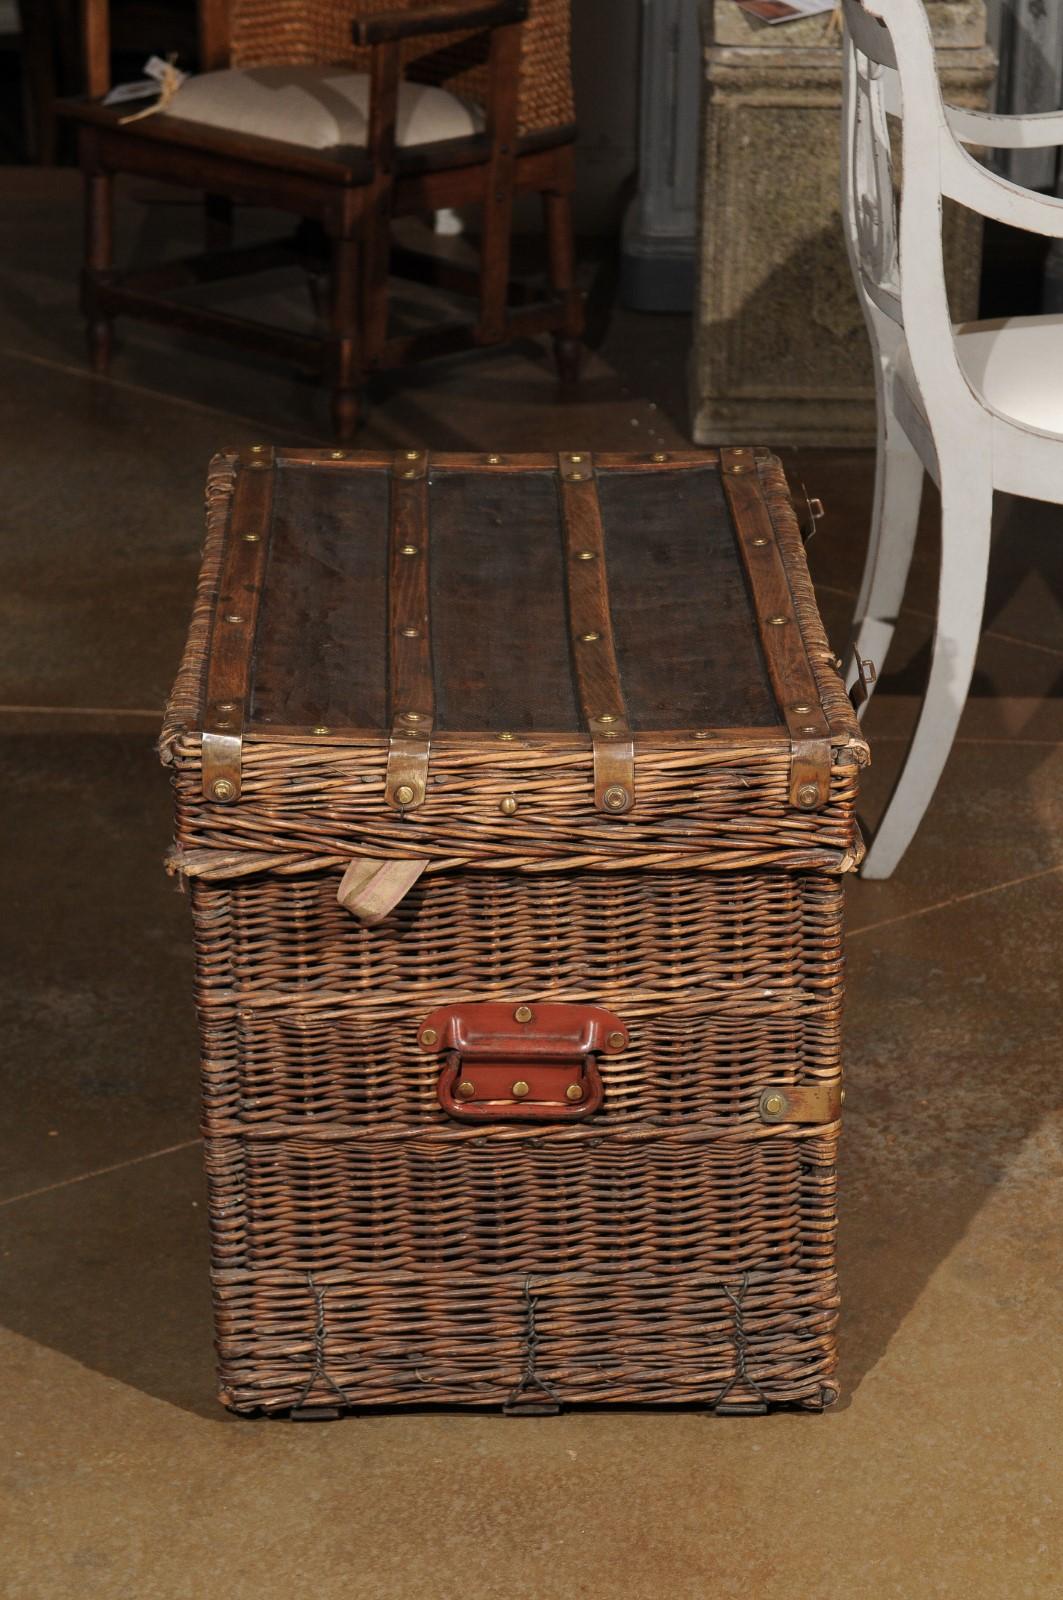 A large French wicker trunk from the 19th century, with brass hardware, straps and red painted lateral handles. Born in France during the politically dynamic 19th century, this wicker trunk features a rectangular lid, adorned with straps, opening